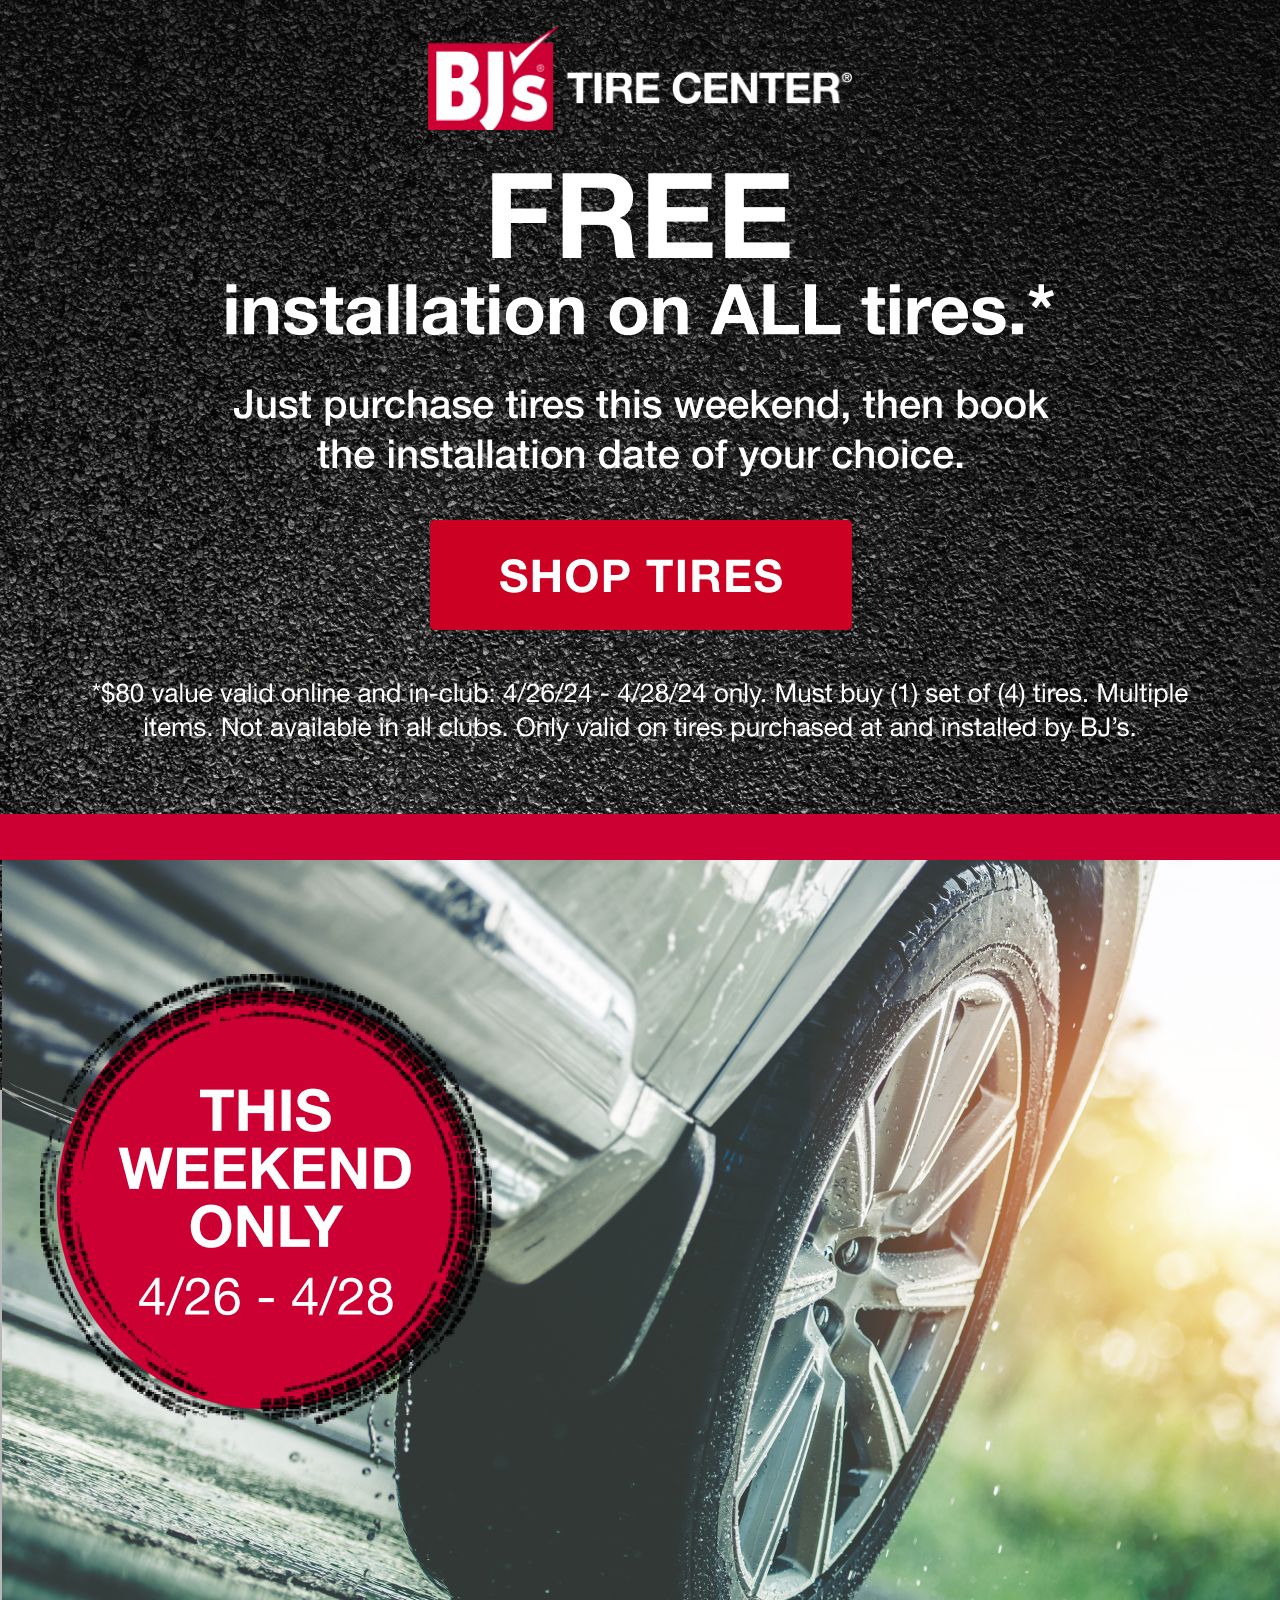 BJs Tire Center. Click here to shop tires